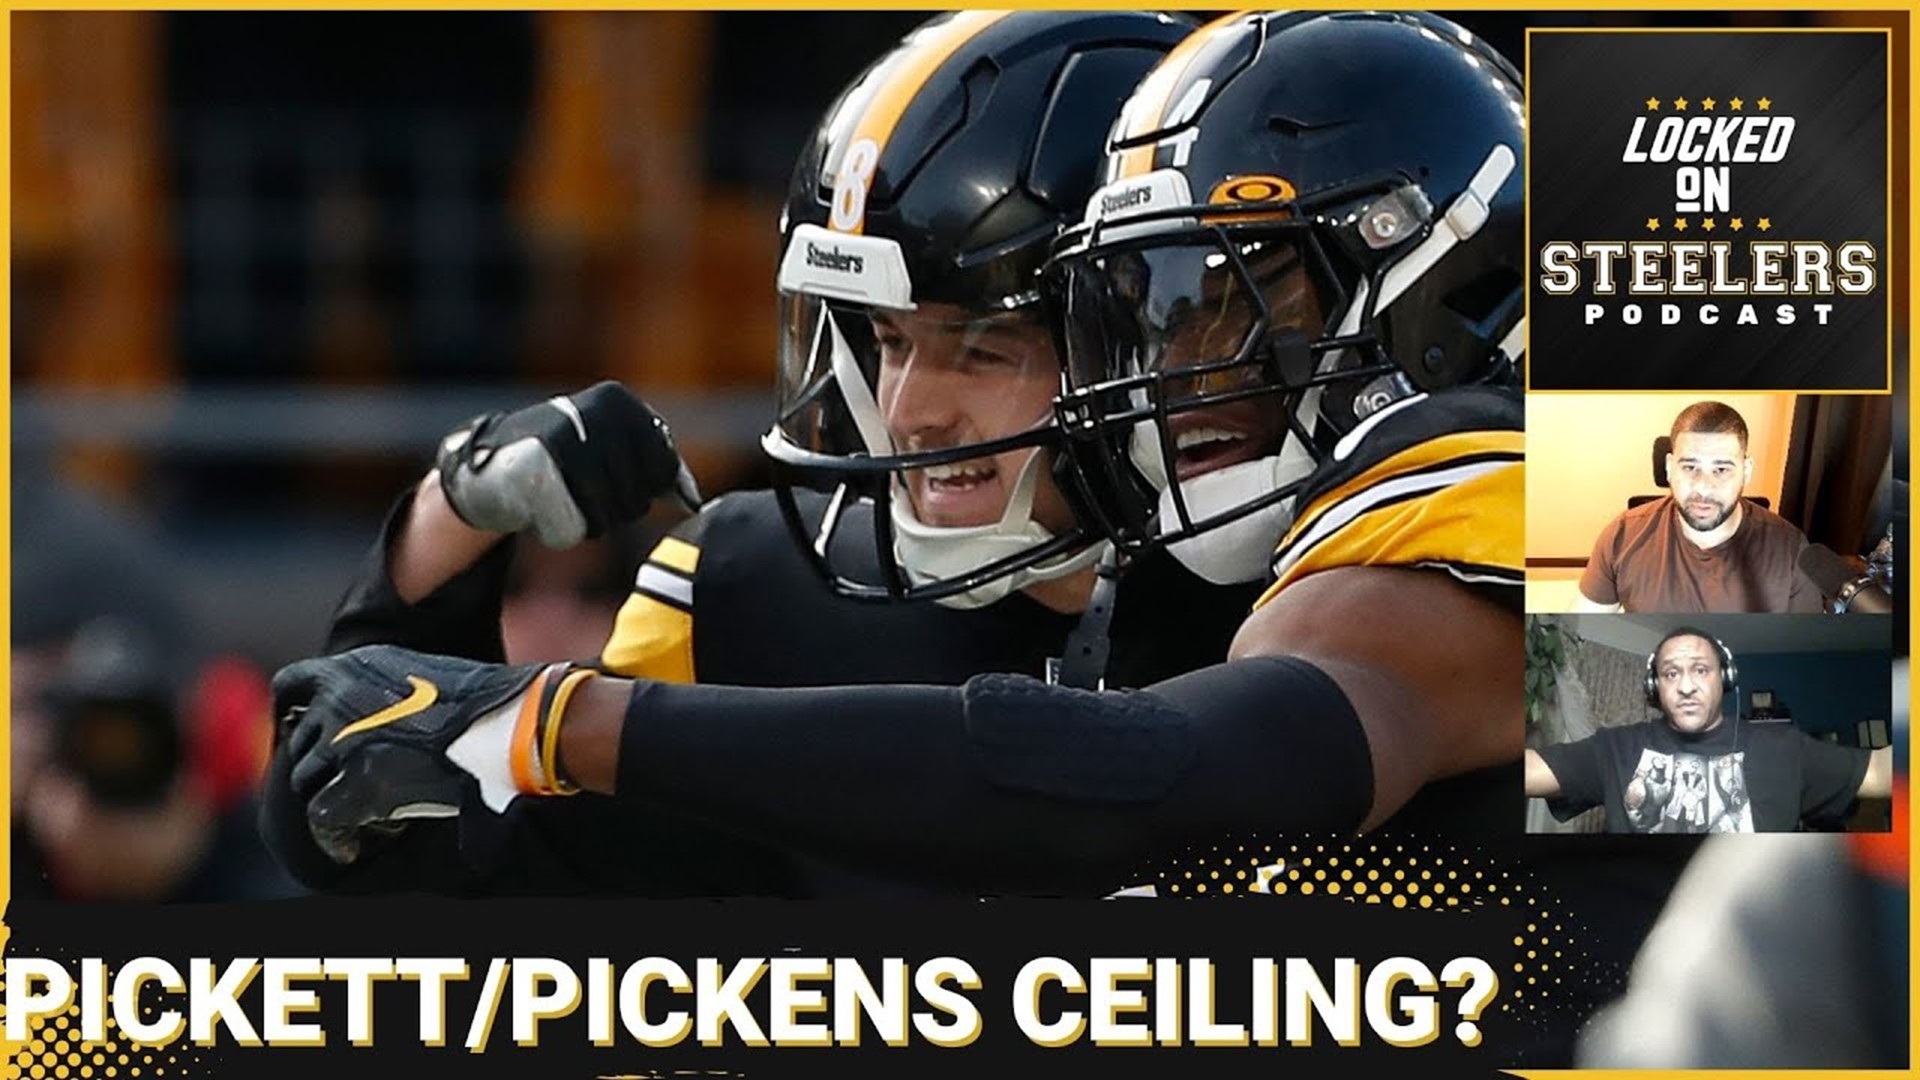 The Pittsburgh Steelers' top picks in the NFL Draft combined for some impressive stats in 2022. Kenny Pickett and George Pickens combined for a passer rating of 120.